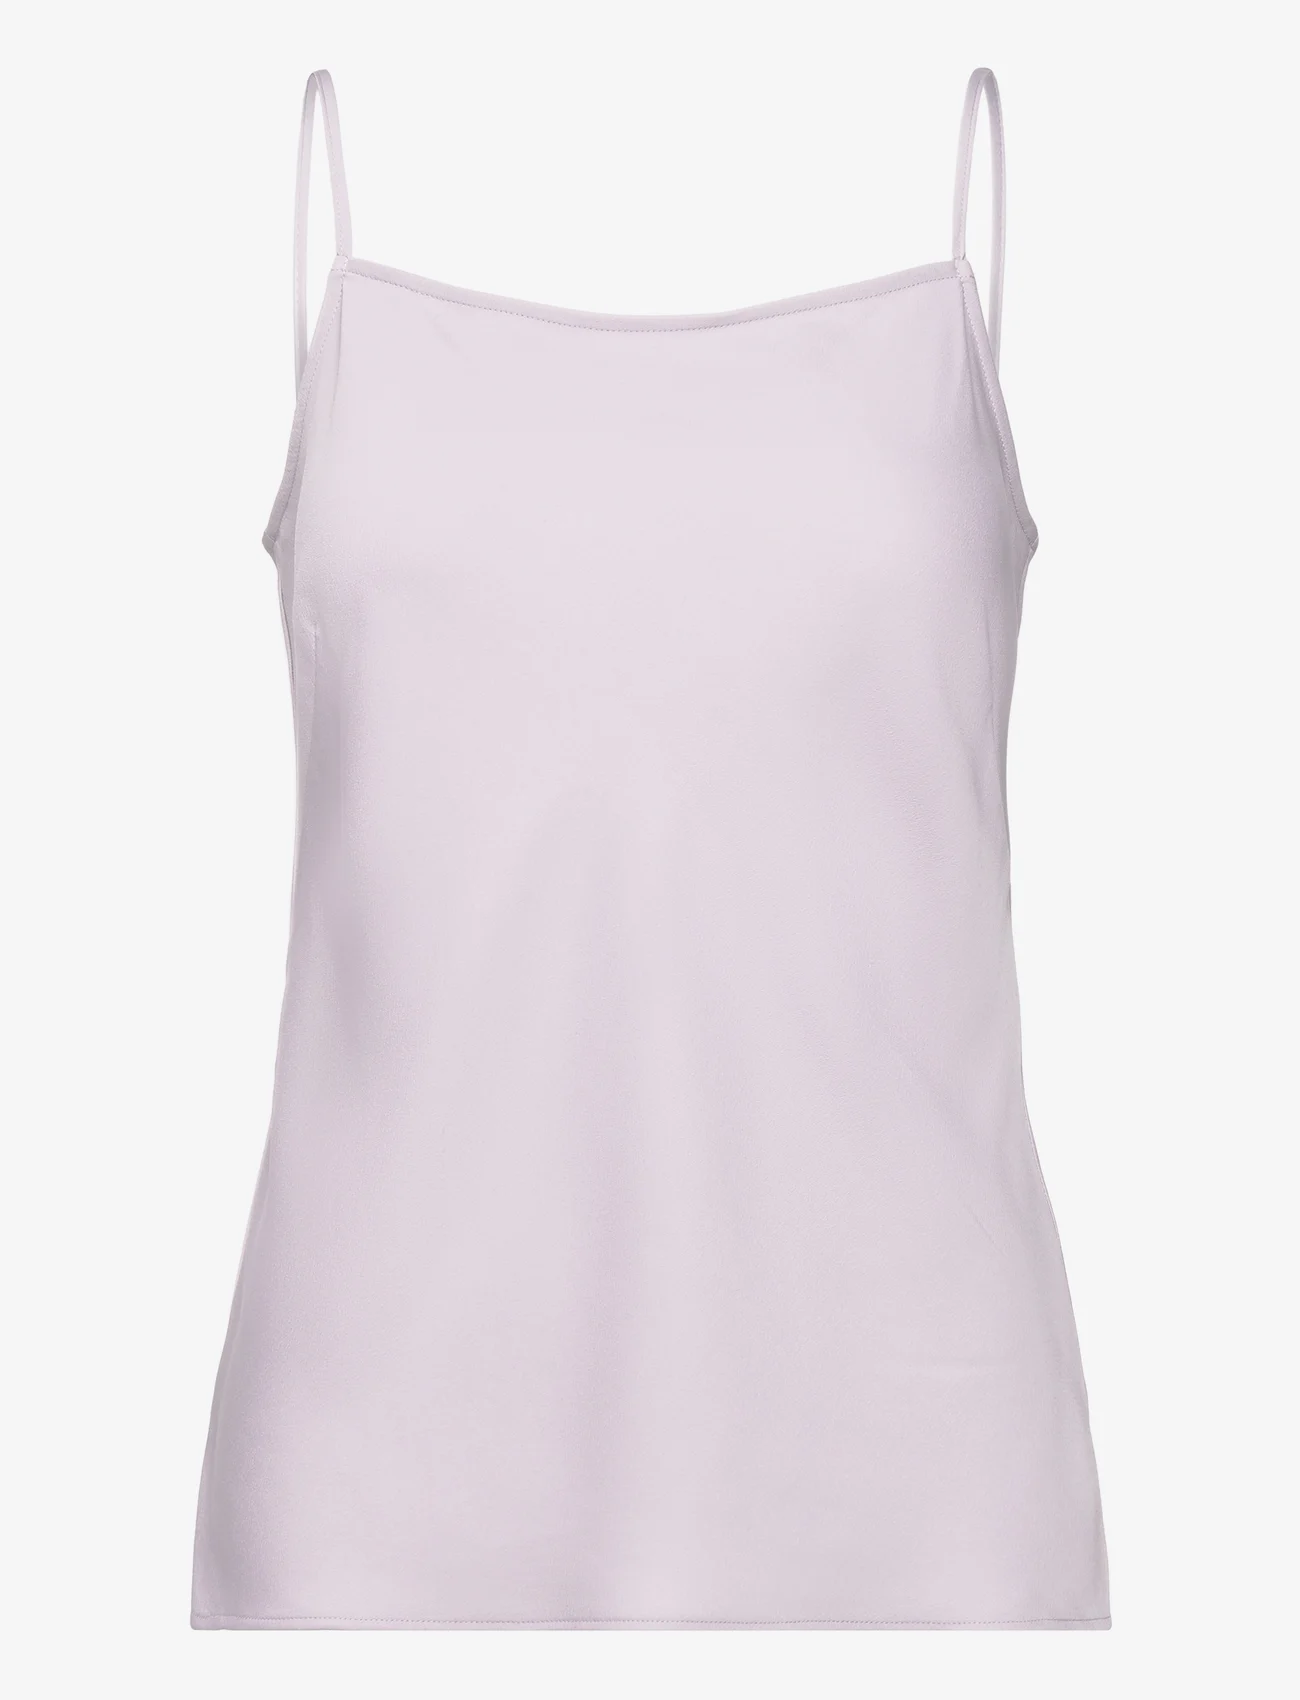 Calvin Klein - RECYCLED CDC CAMI TOP - t-shirt & tops - lilac dusk - 0